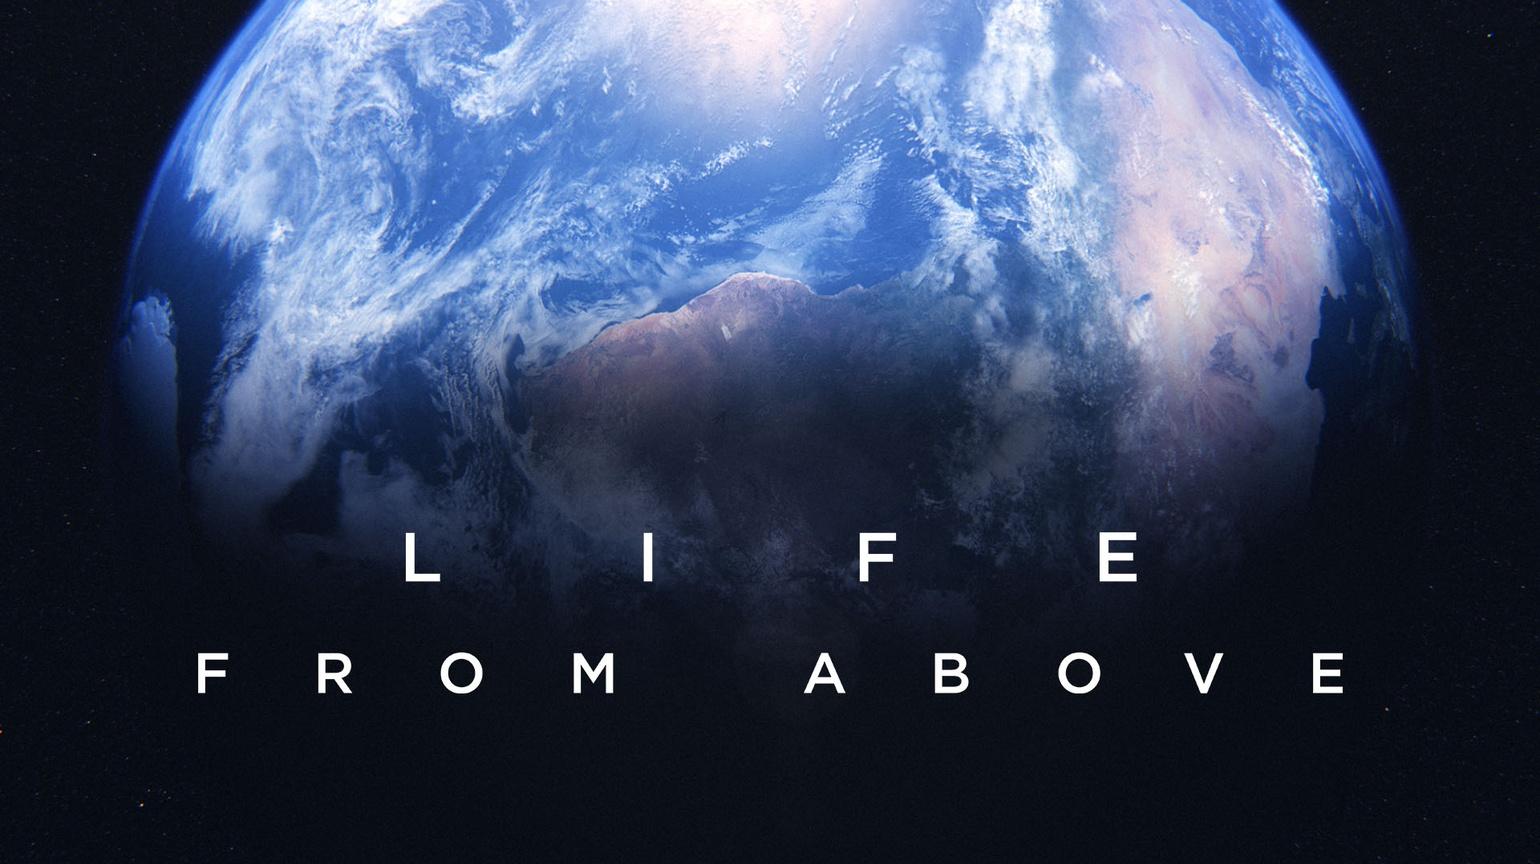 Earth From Above: Life [DVD]